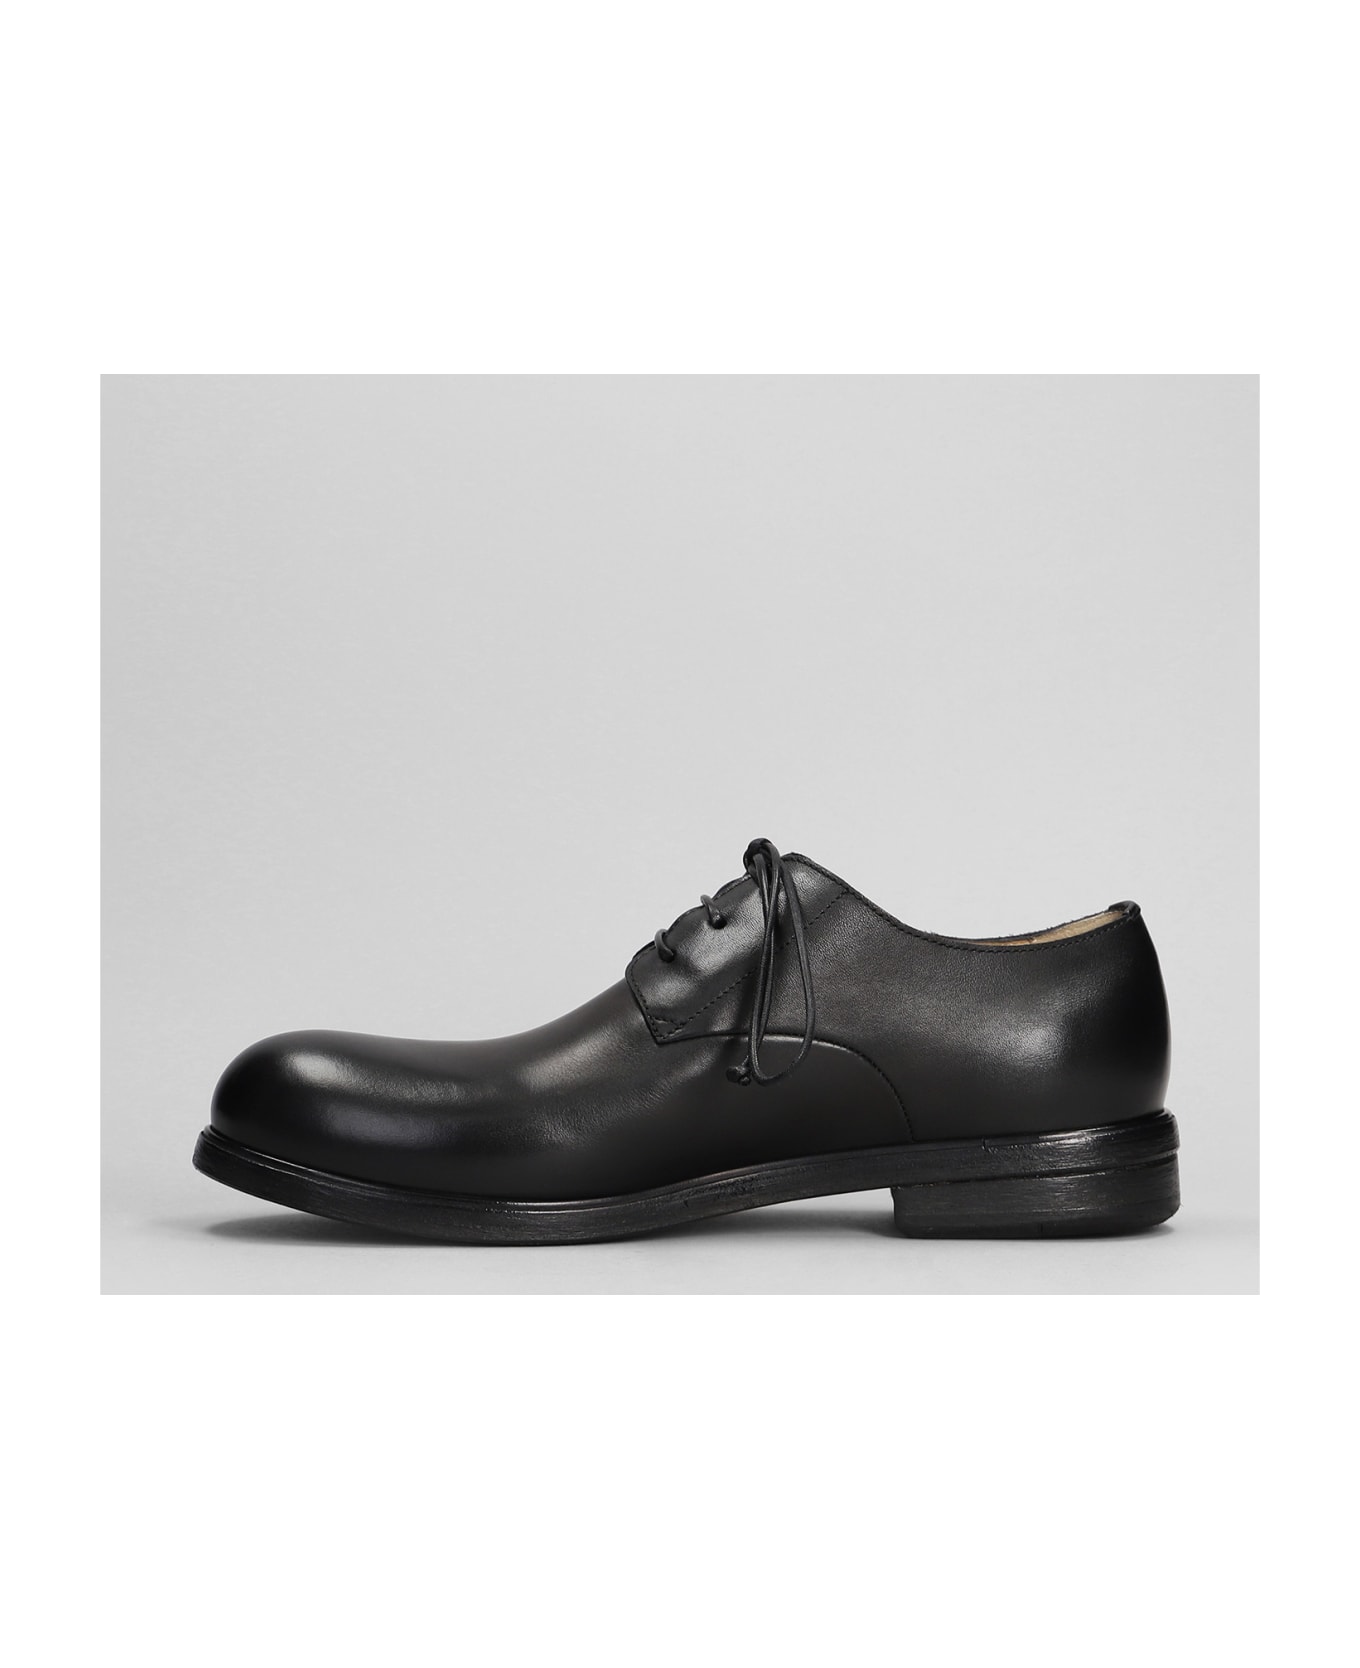 Marsell Lace Up Shoes In Black Leather - black